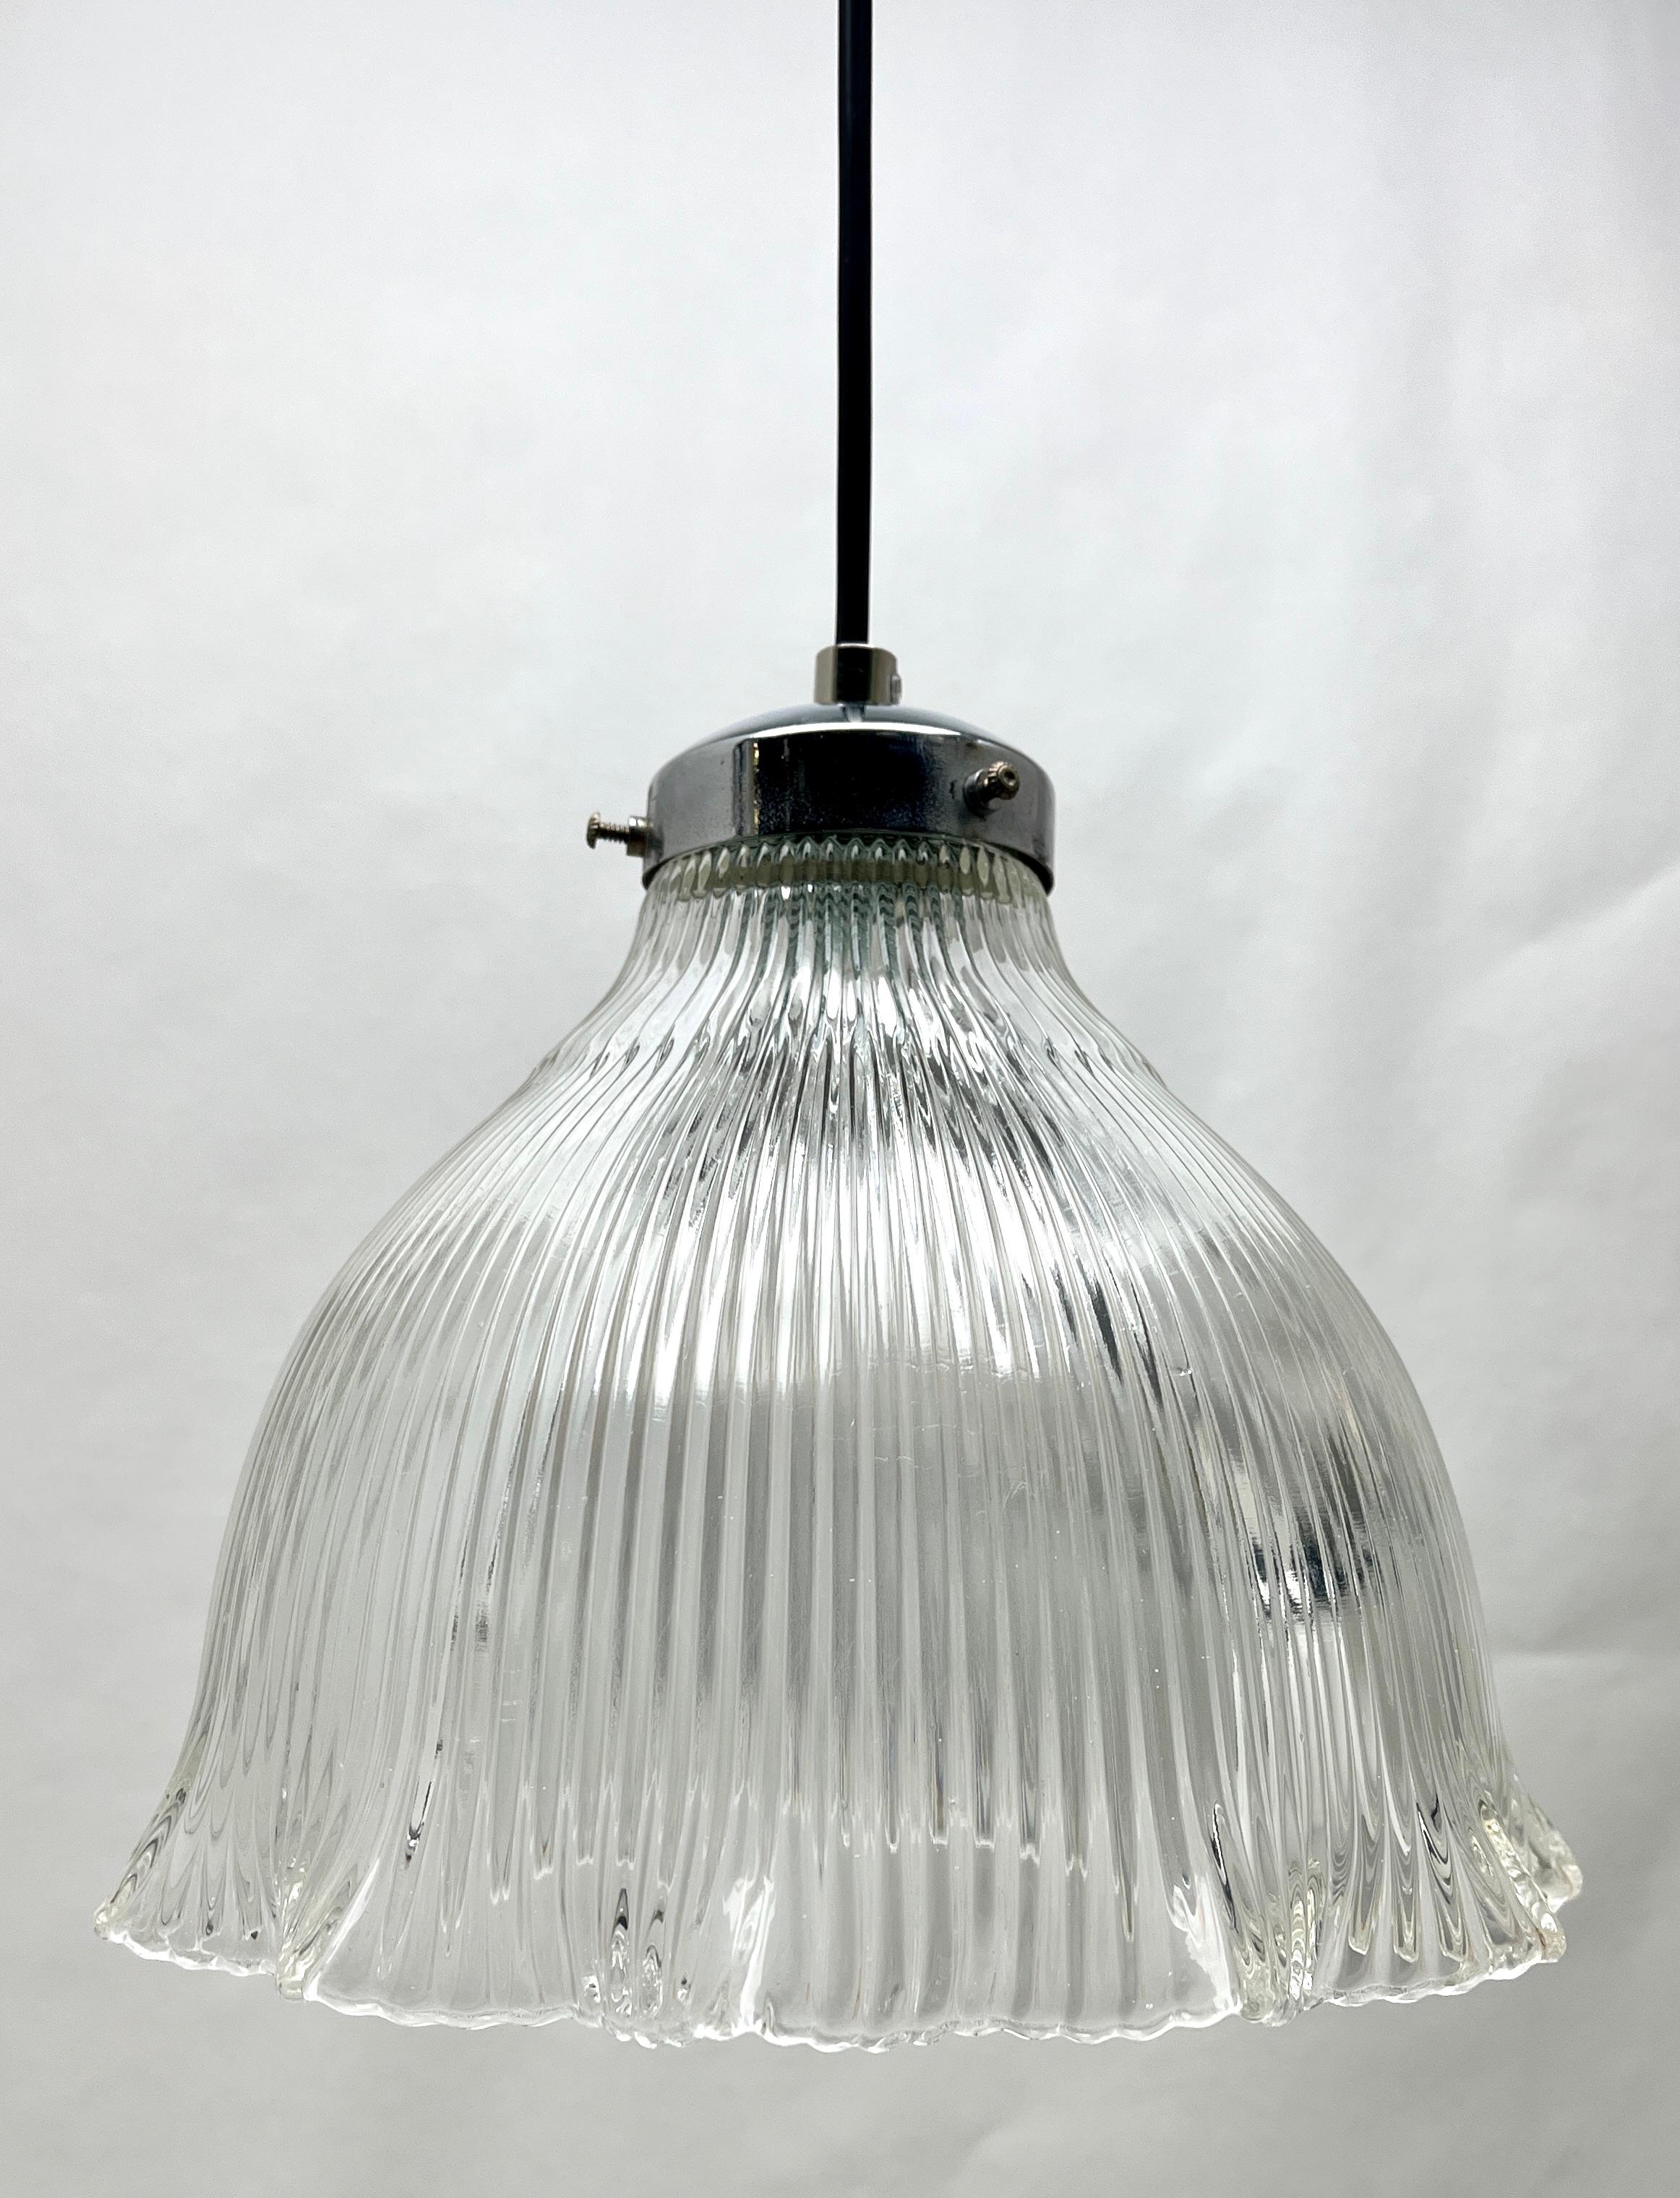 Mid-20th Century Pendant Lamp with a Corrugated Glass Shade, 1950s, Netherlands For Sale